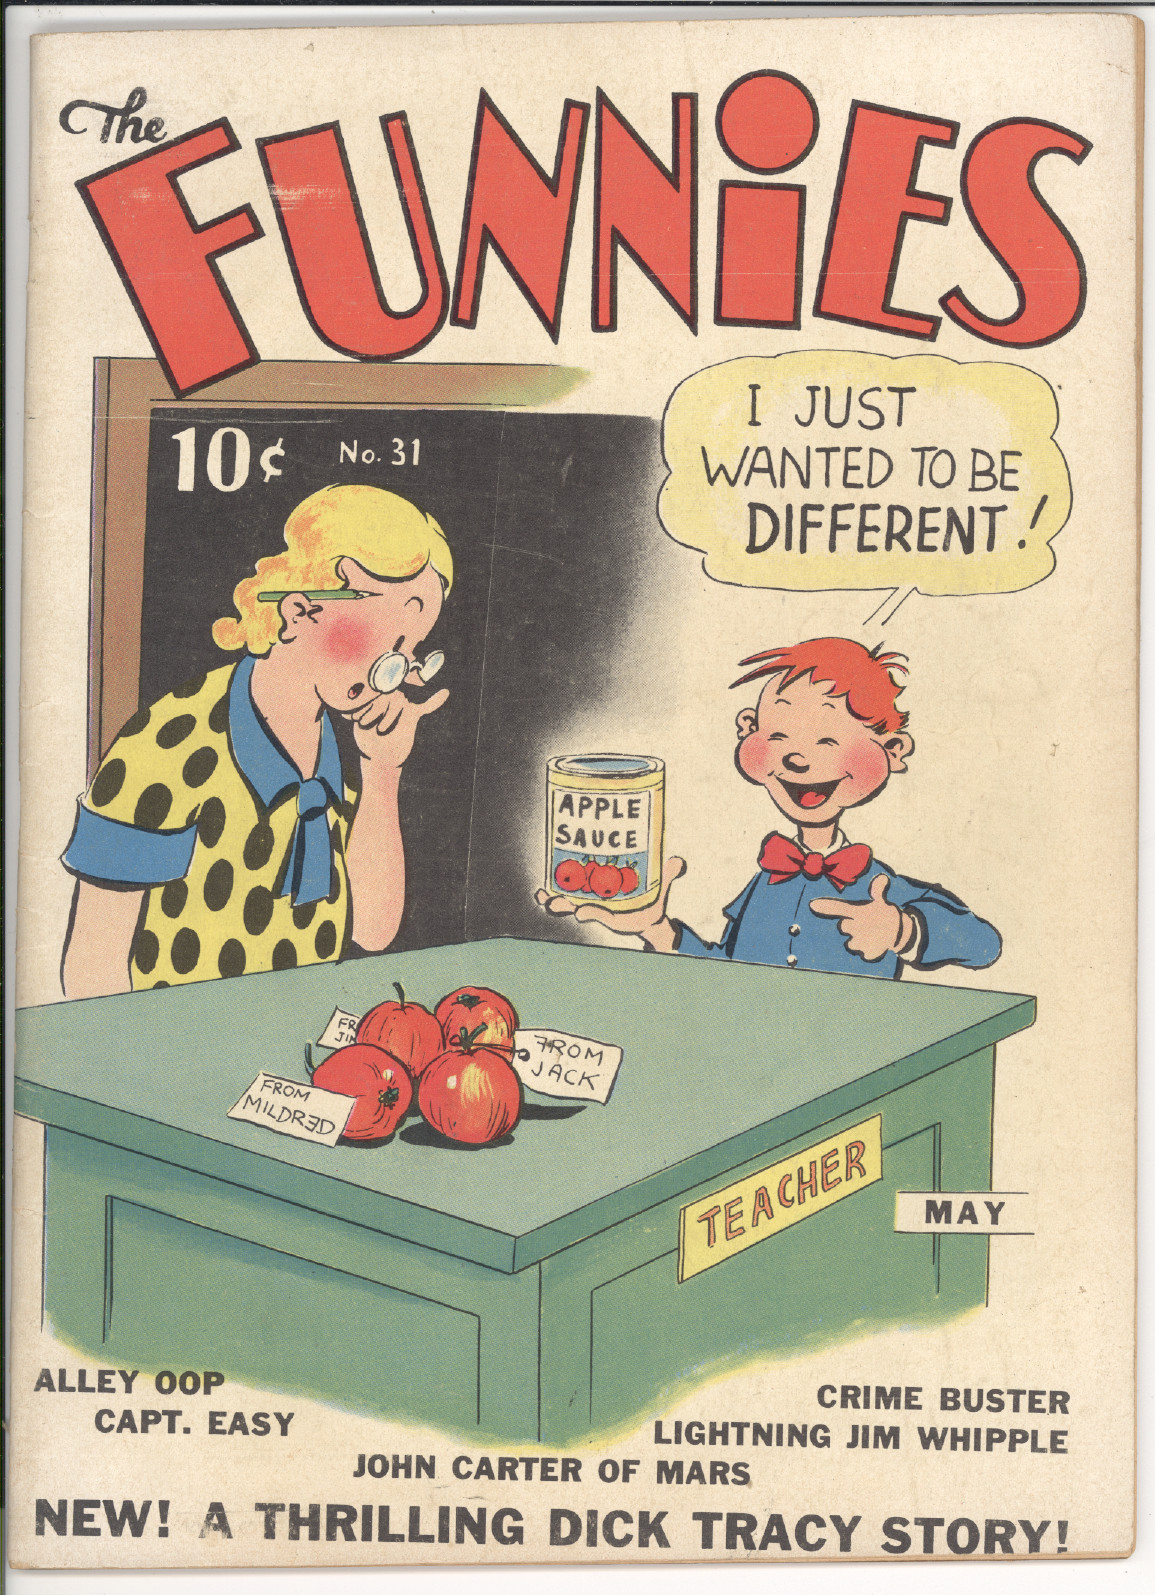 The Funnies #31 front